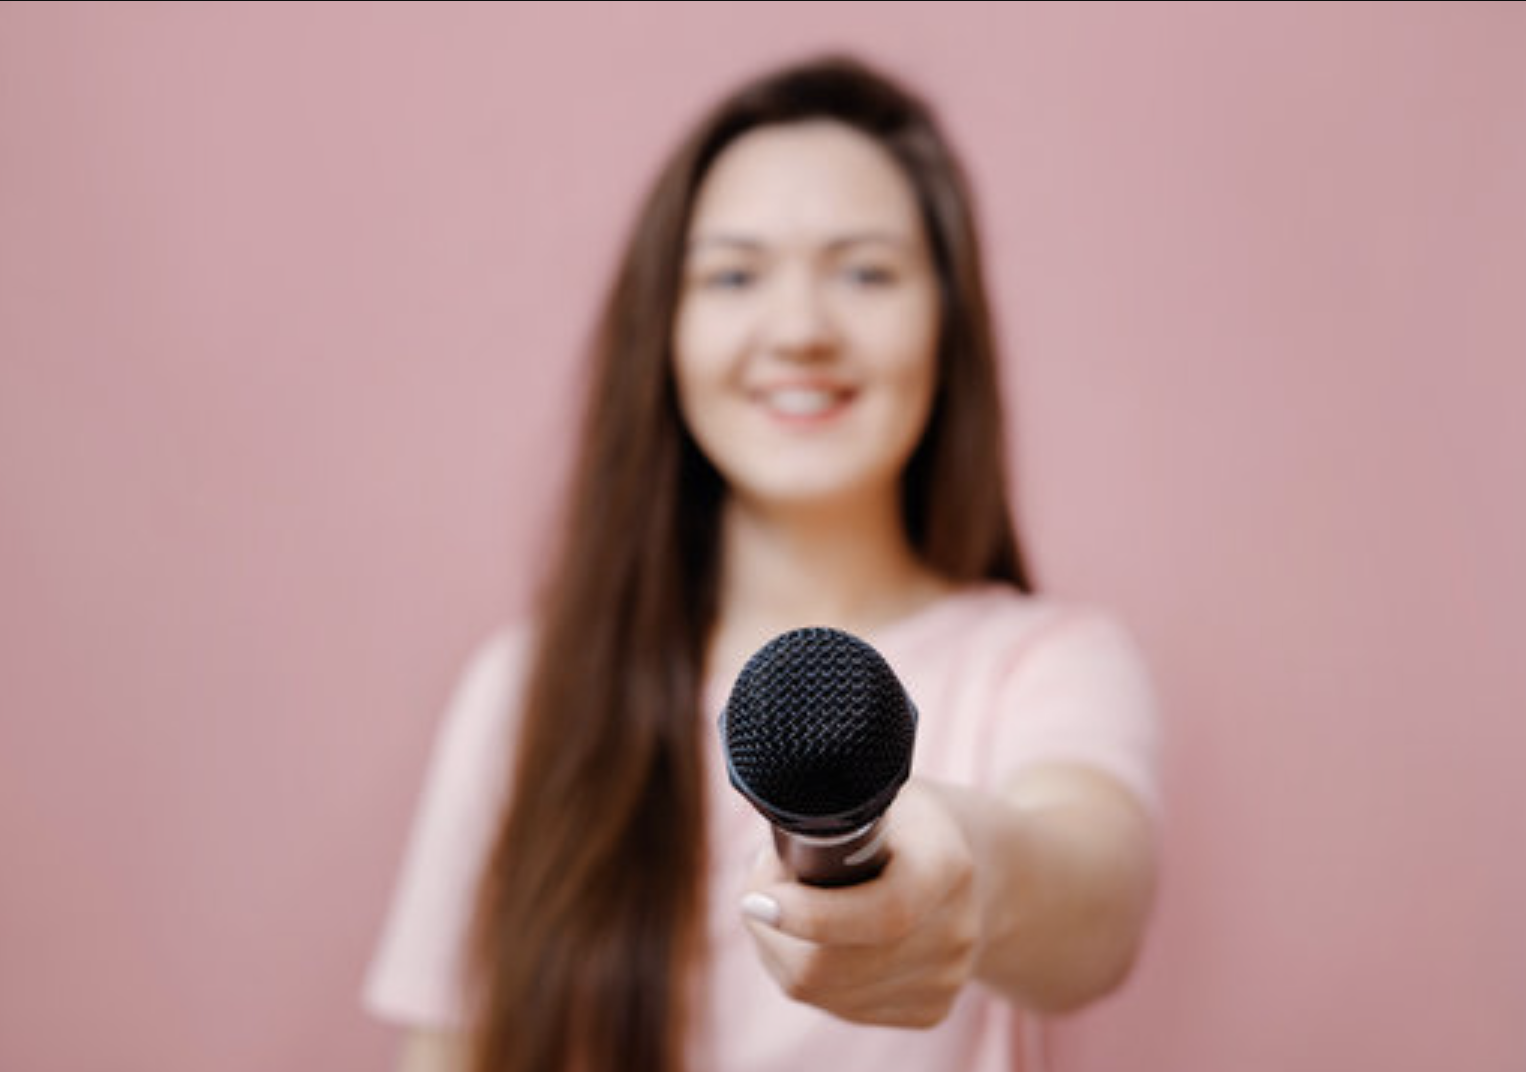 Woman offering microphone graphic on pink background